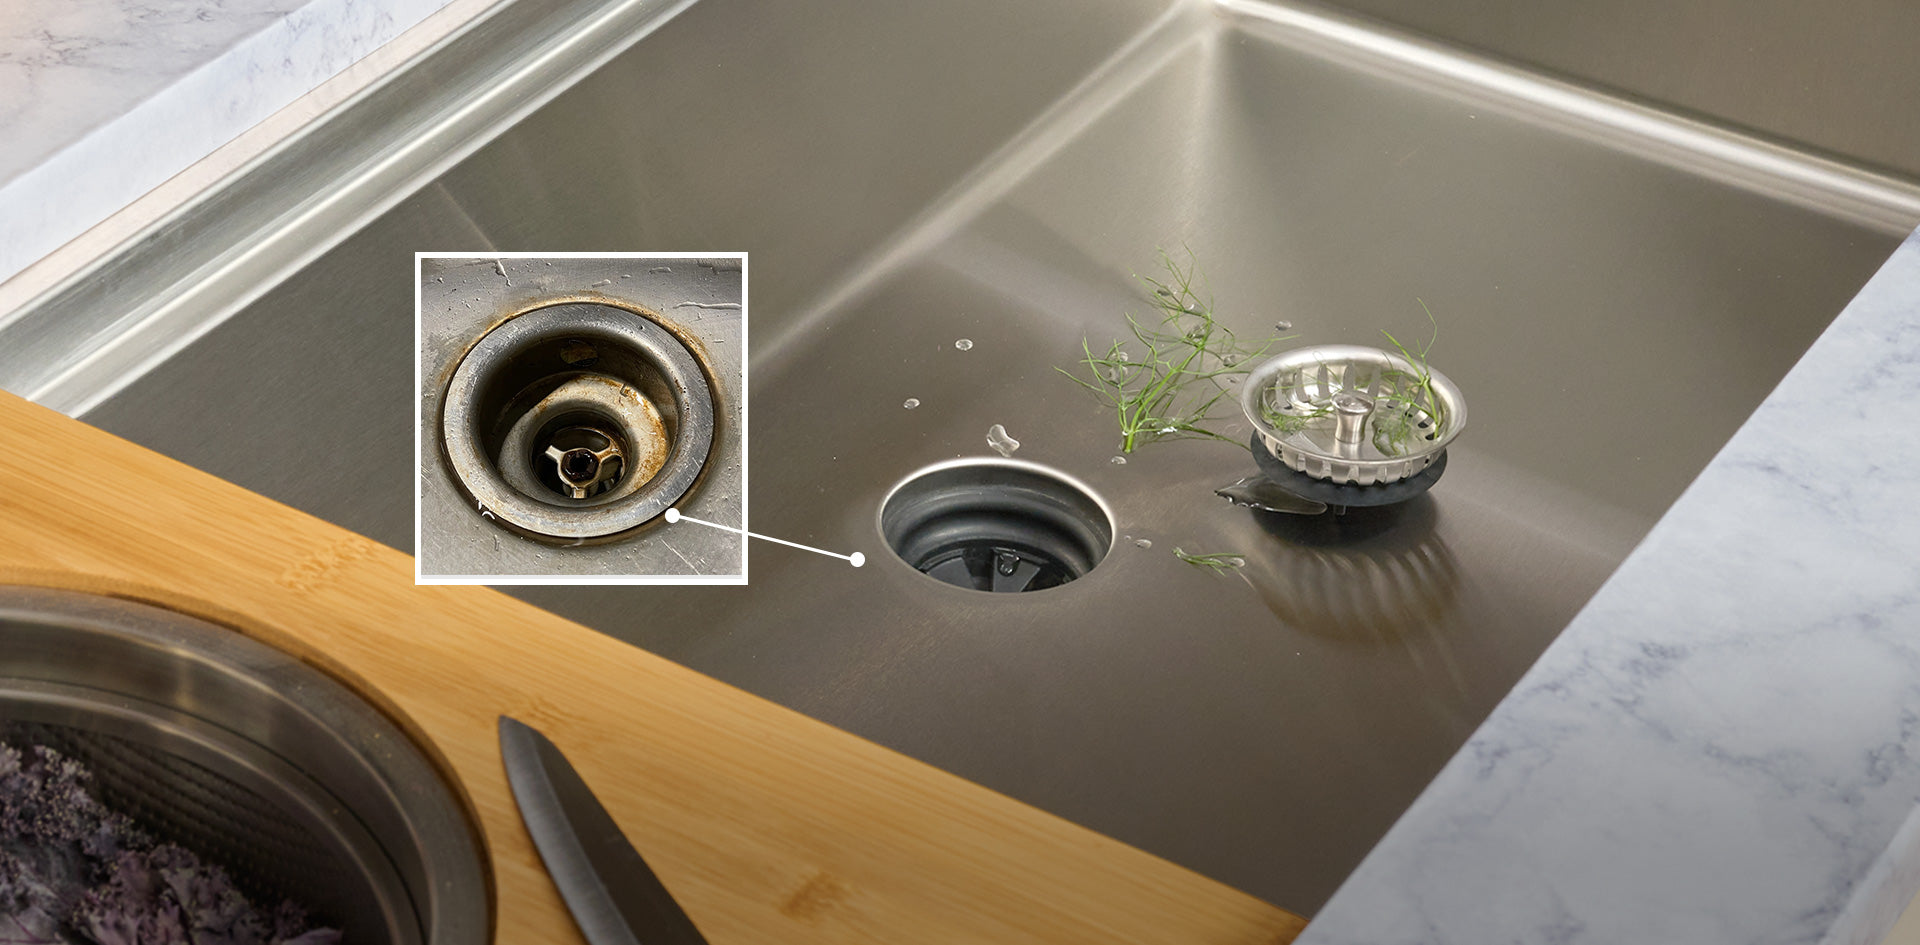 Create Good Sinks large single bowl stainless steel workstation sink with built in ledge for sliding accessories. Shown with our patented seamless undermount drain and workstation sink colander set